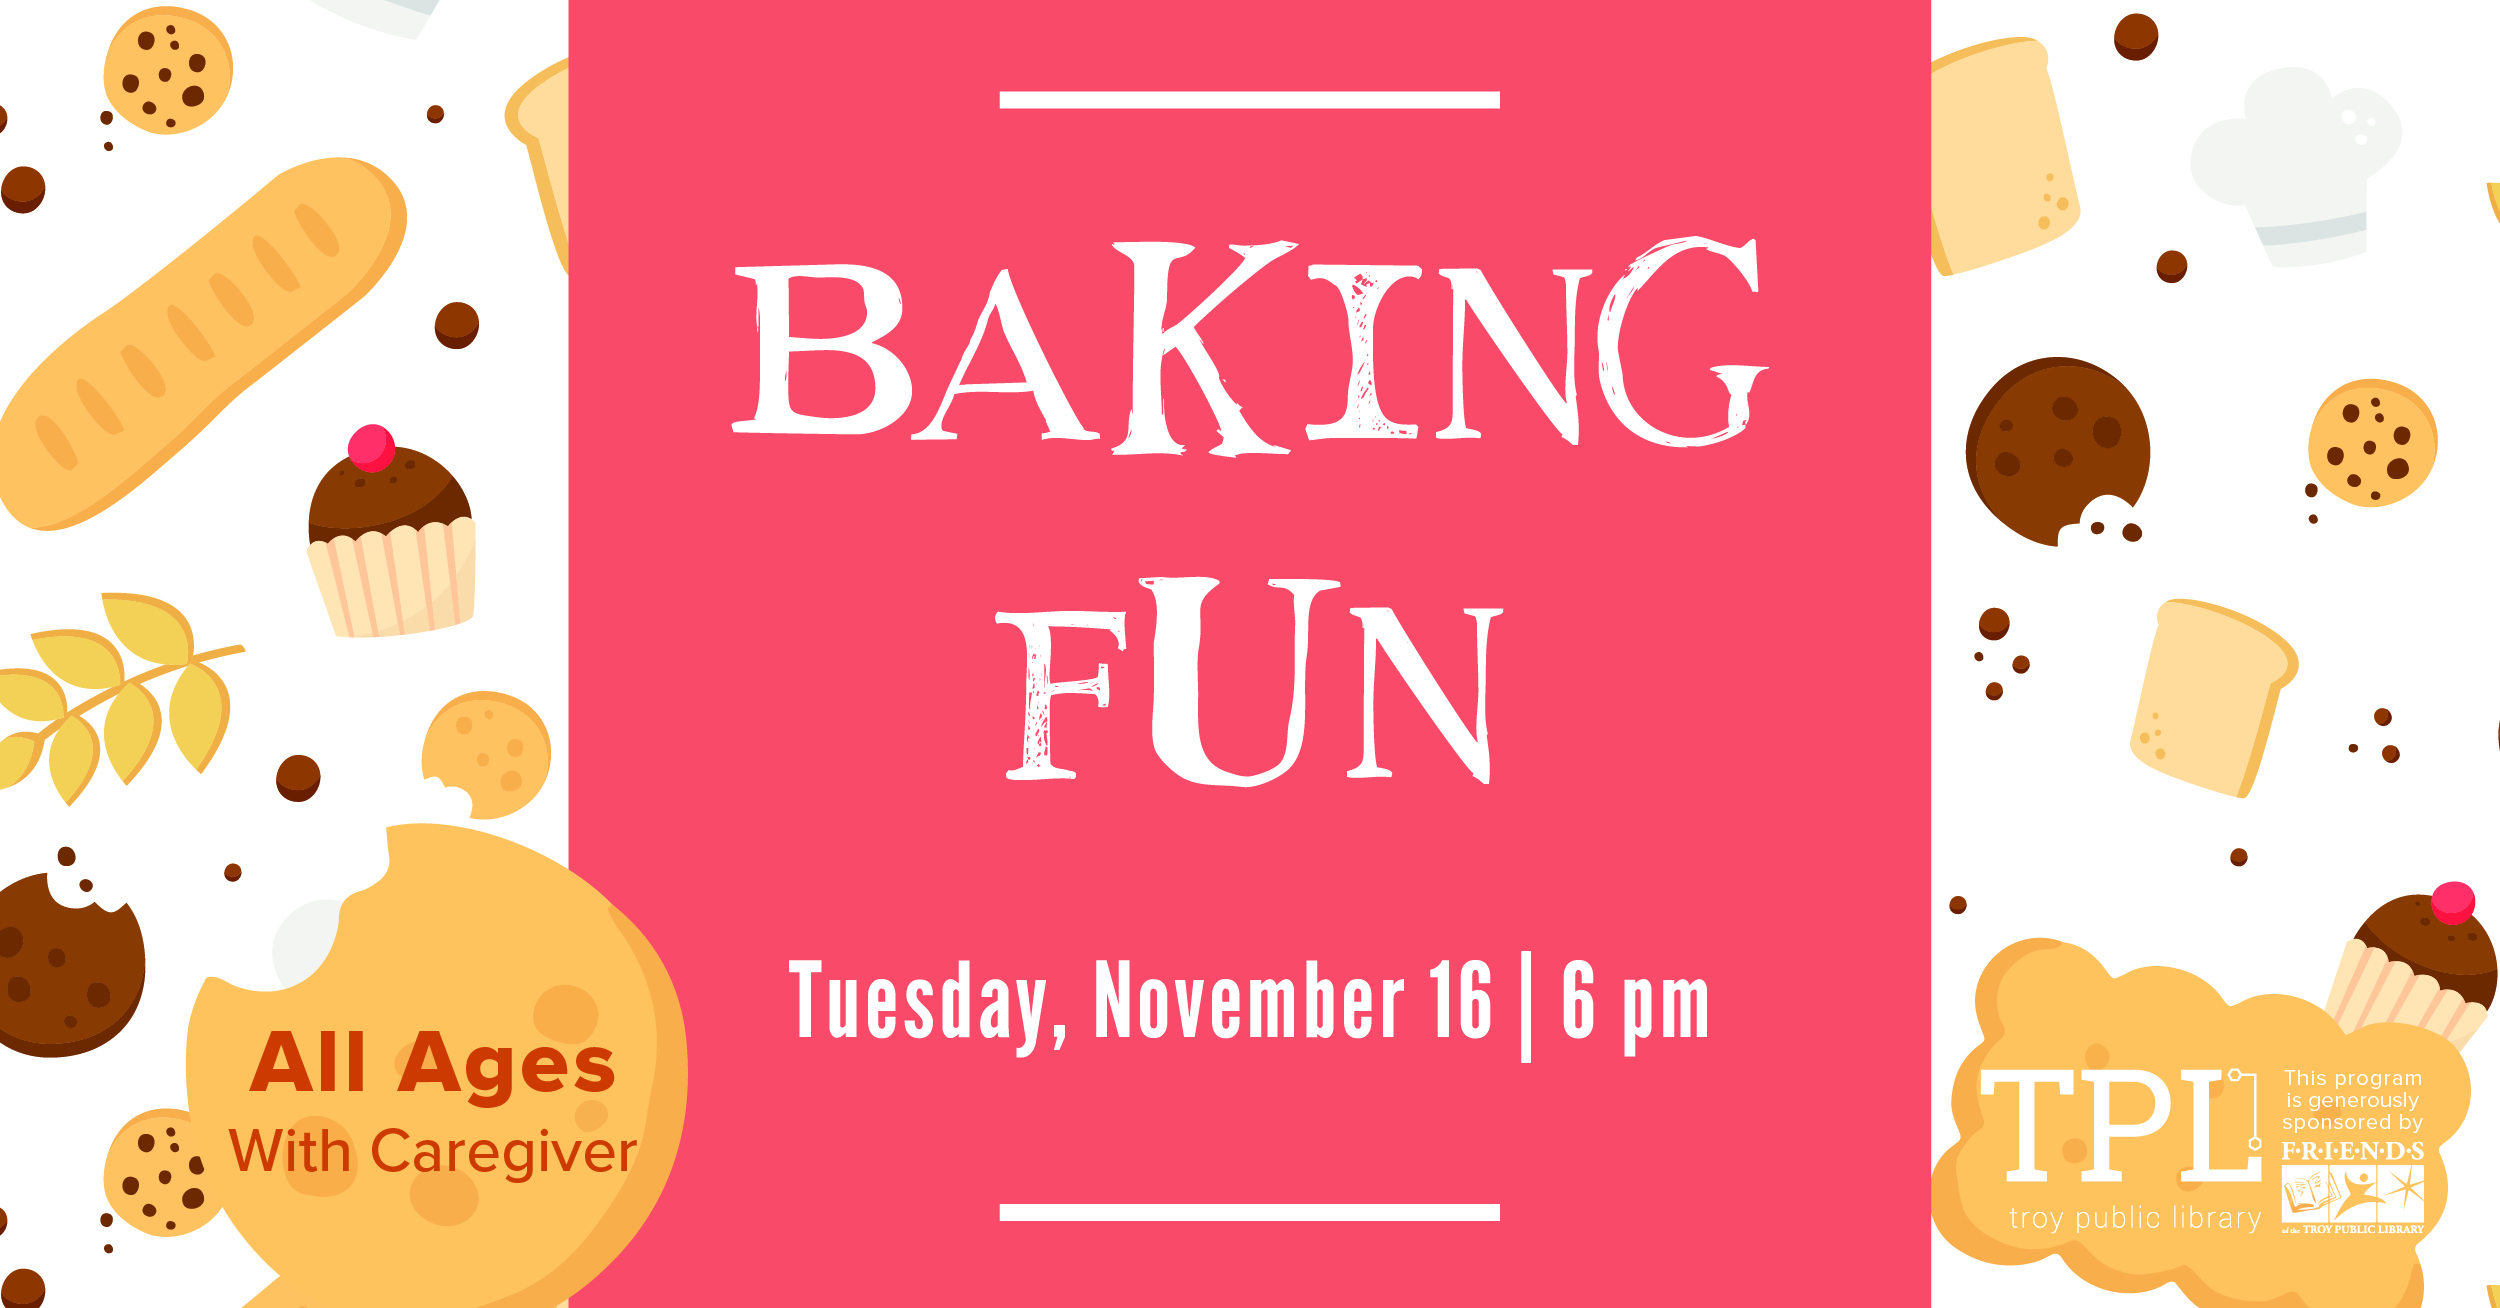 Baking Fun Tuesday, November 16 at 6pm. All Ages with caregiver. Sponsored by Friends of the Troy Public Library